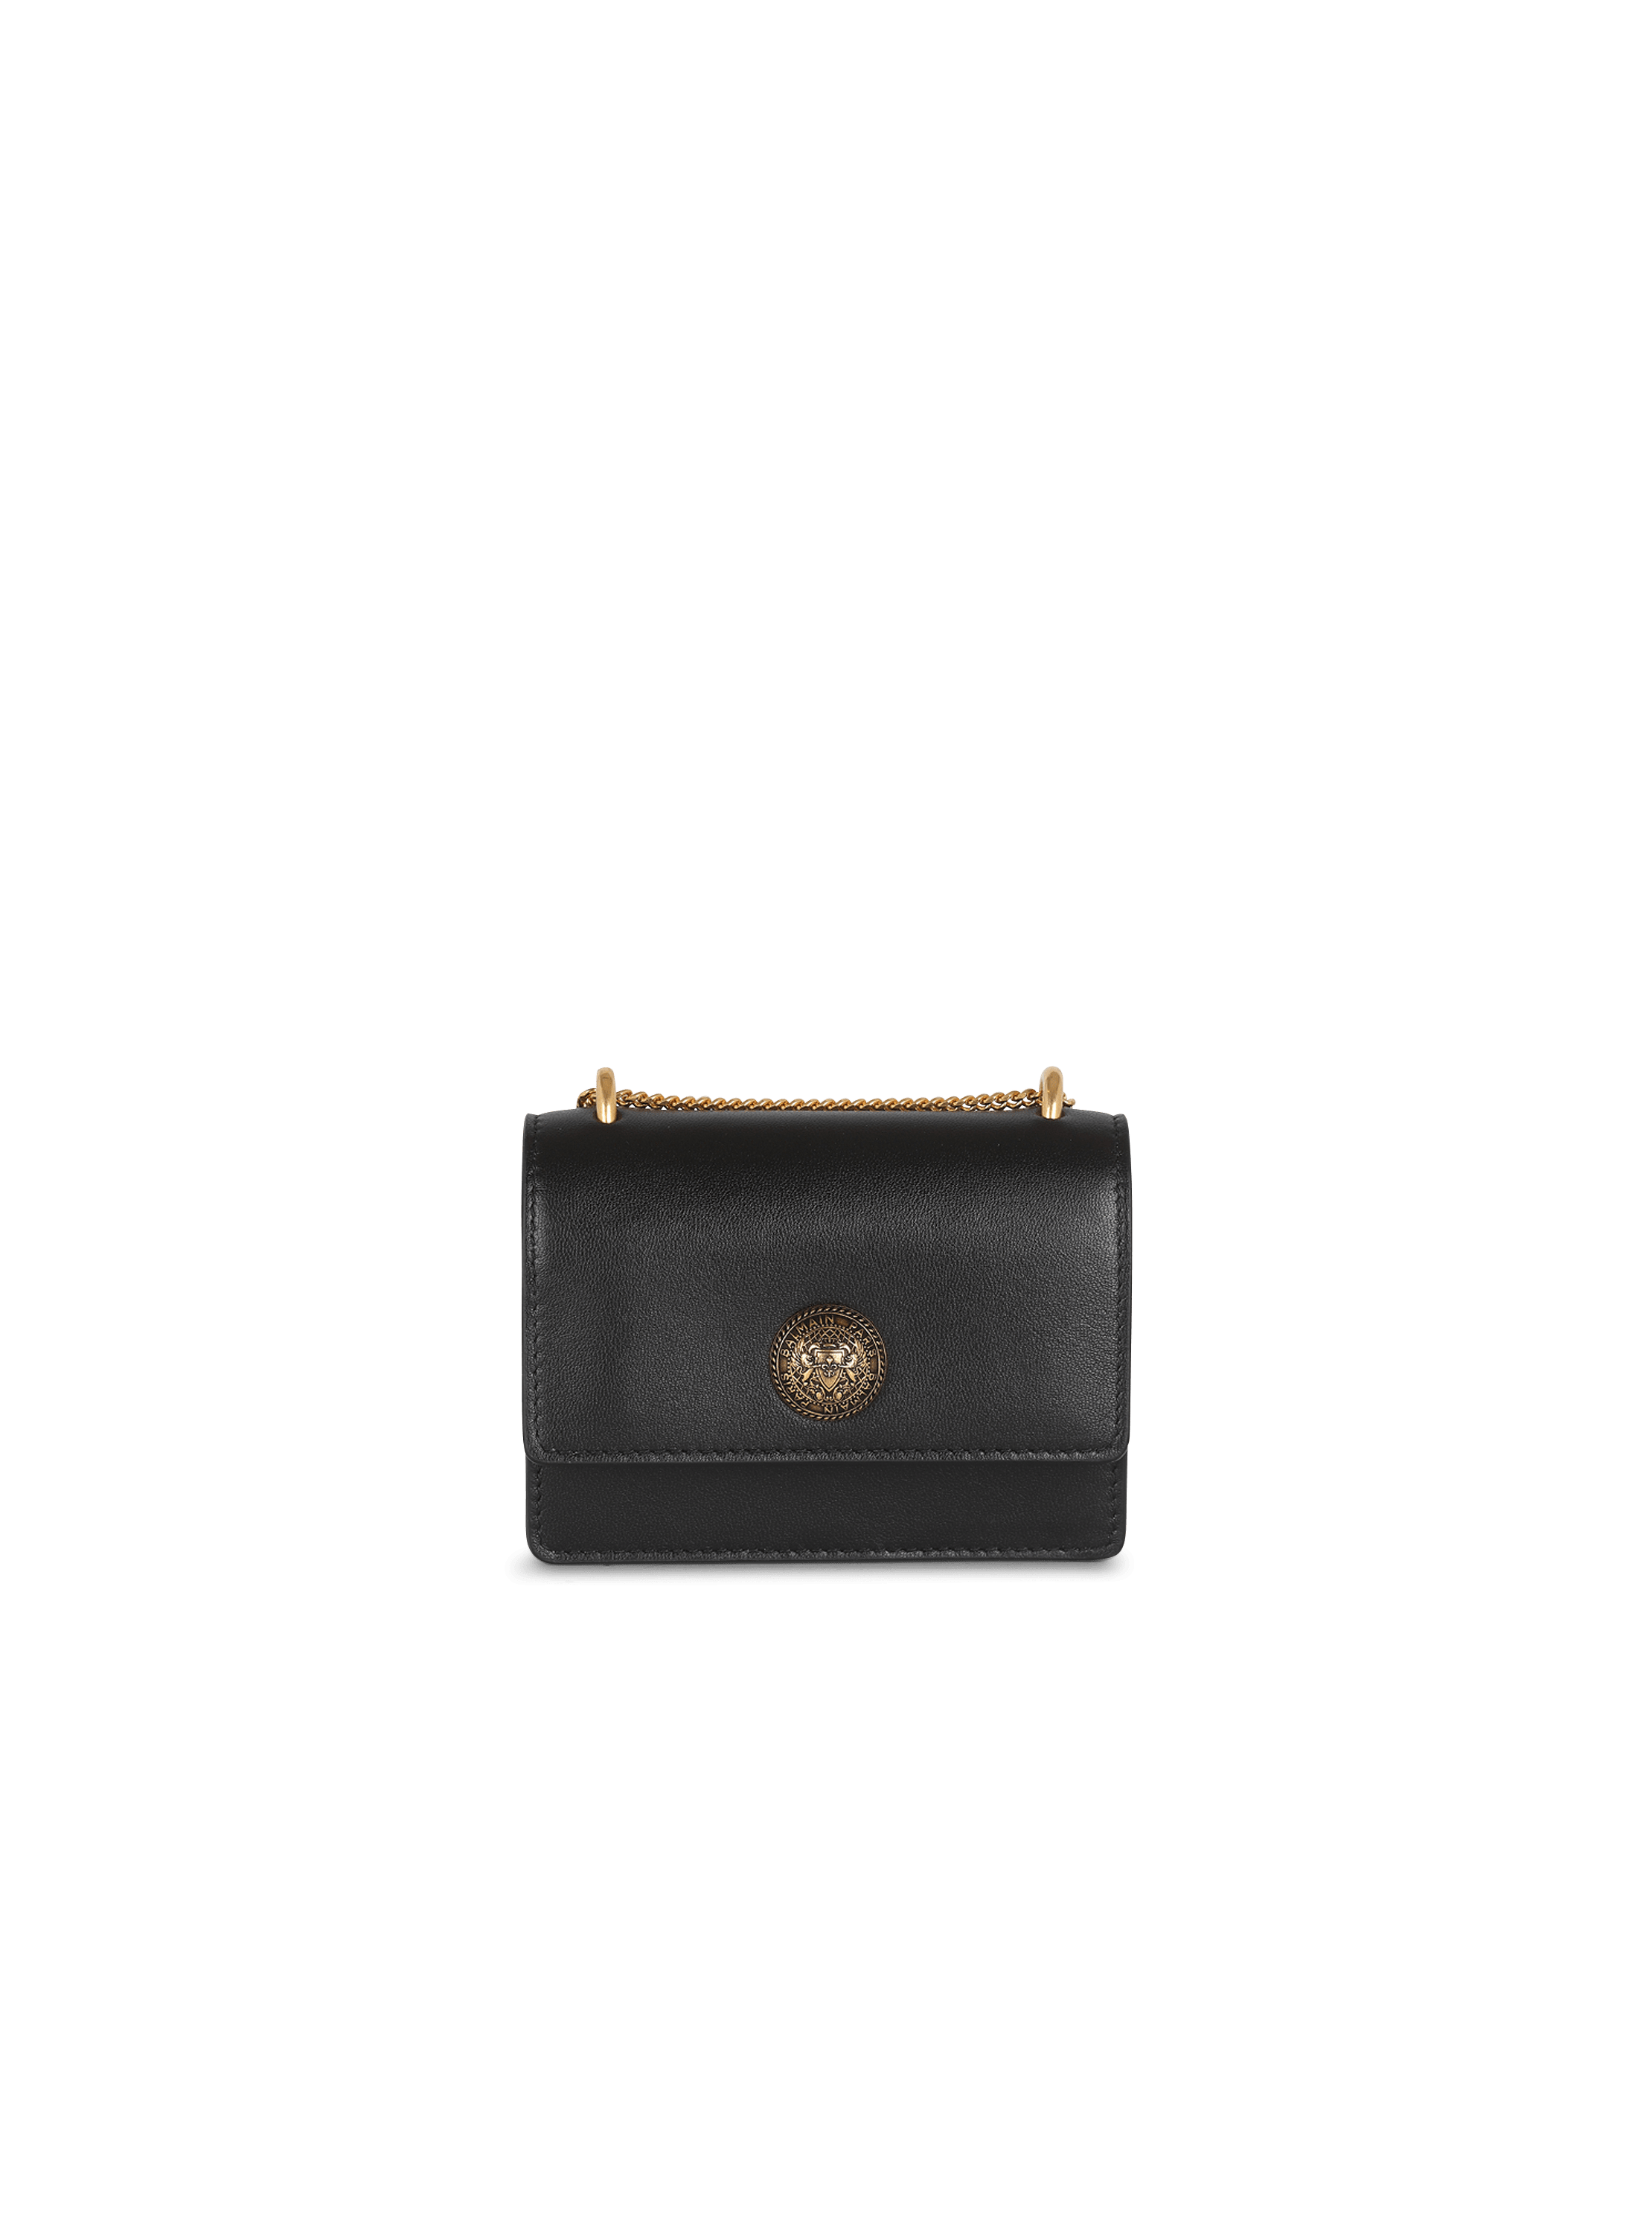 Gucci Coin Purse Wallets for Women